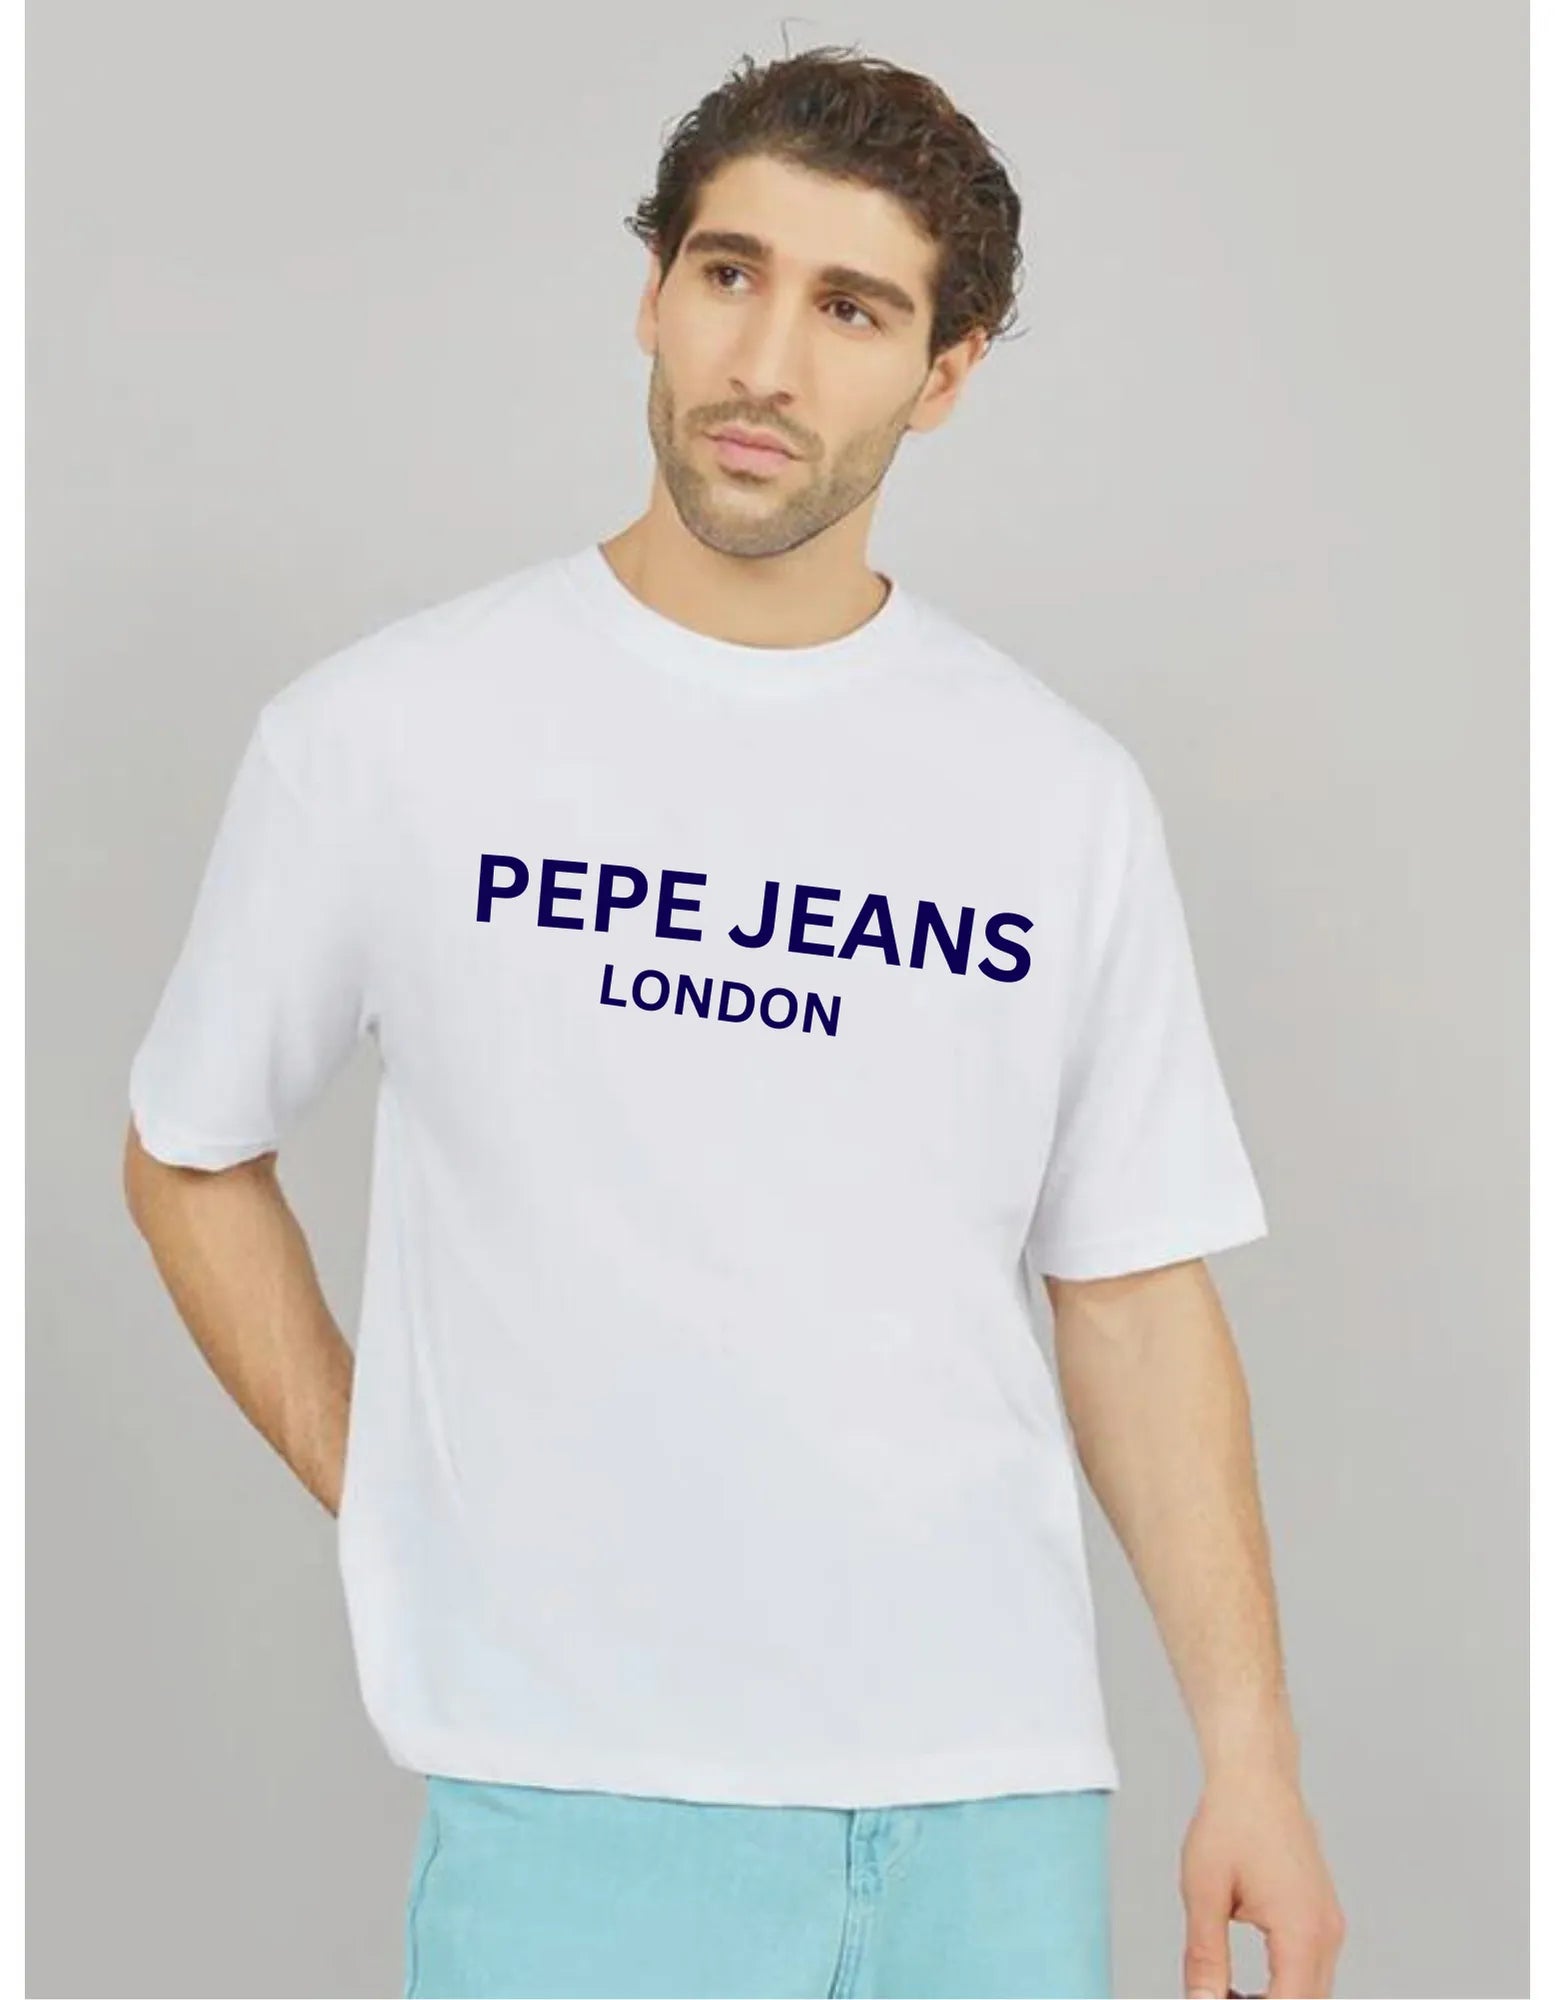 Pepe Jeans Effortless Style and Comfort White T-Shirt for Men